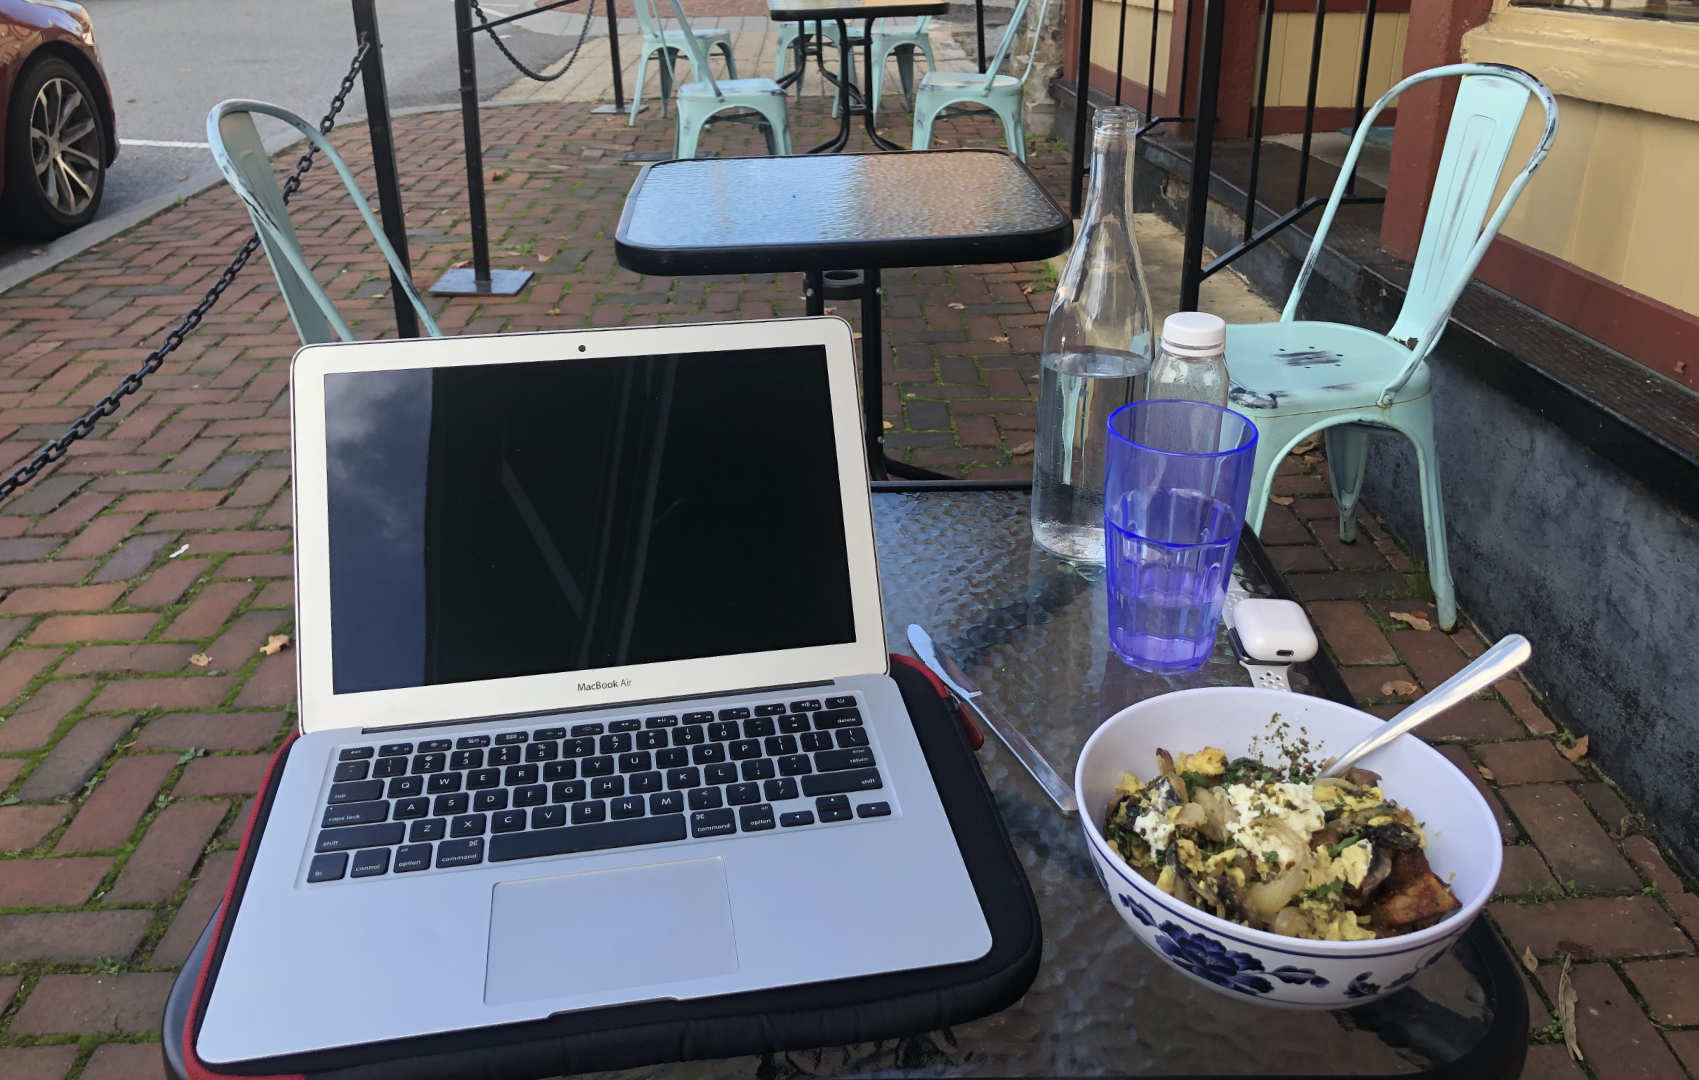 This new-to-me MacBook Air made appearances throughout the year as my mobile TicTocLife writing station!